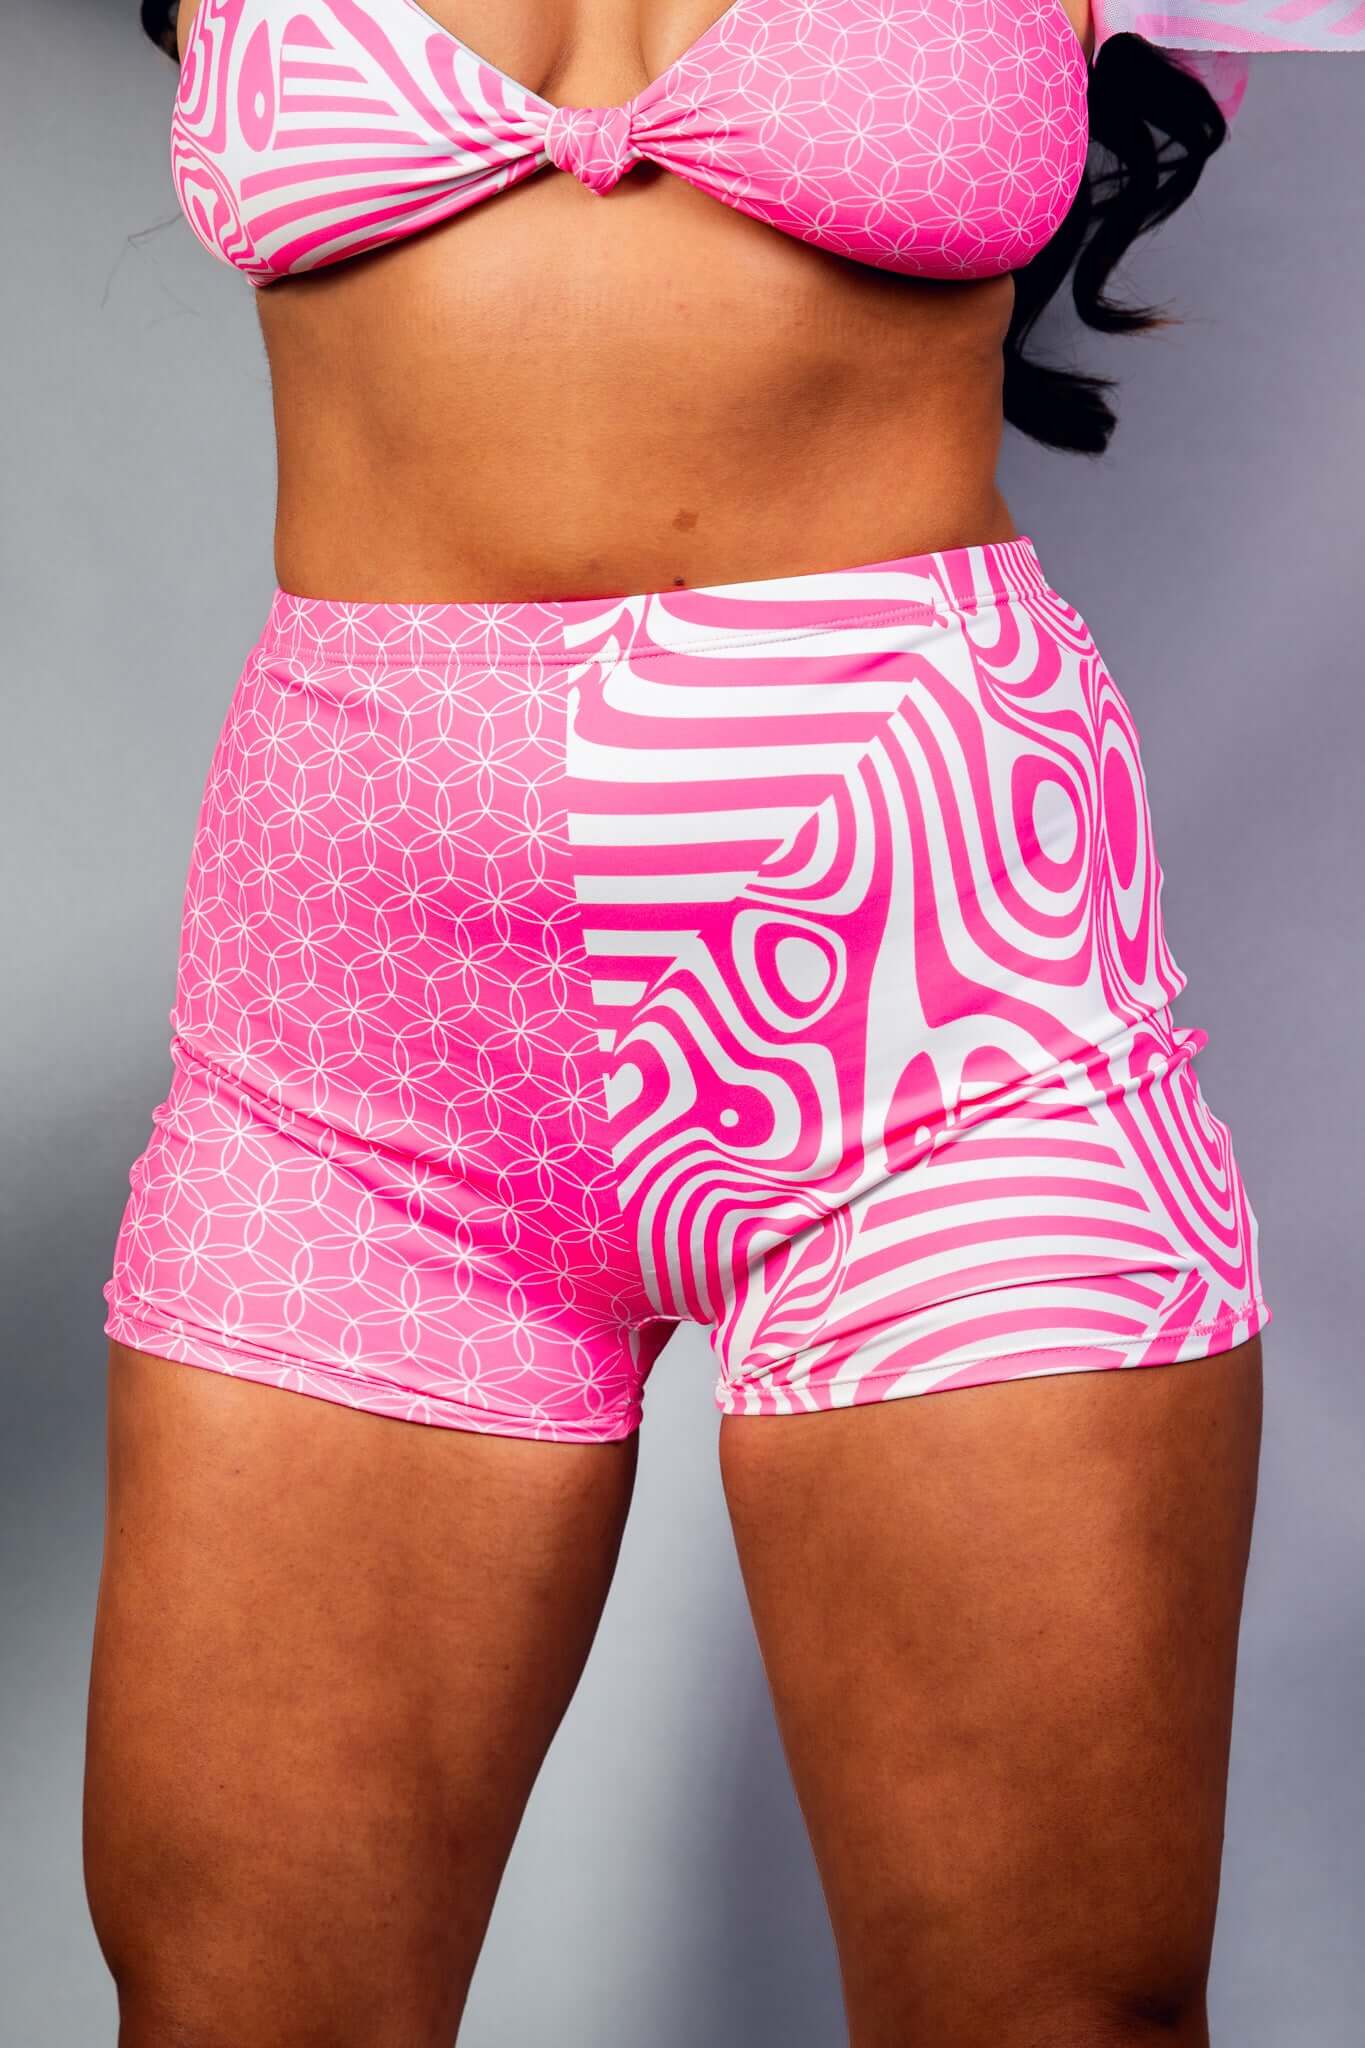 An up close photo of a woman wearing pink and white shorts with a matching crop top.